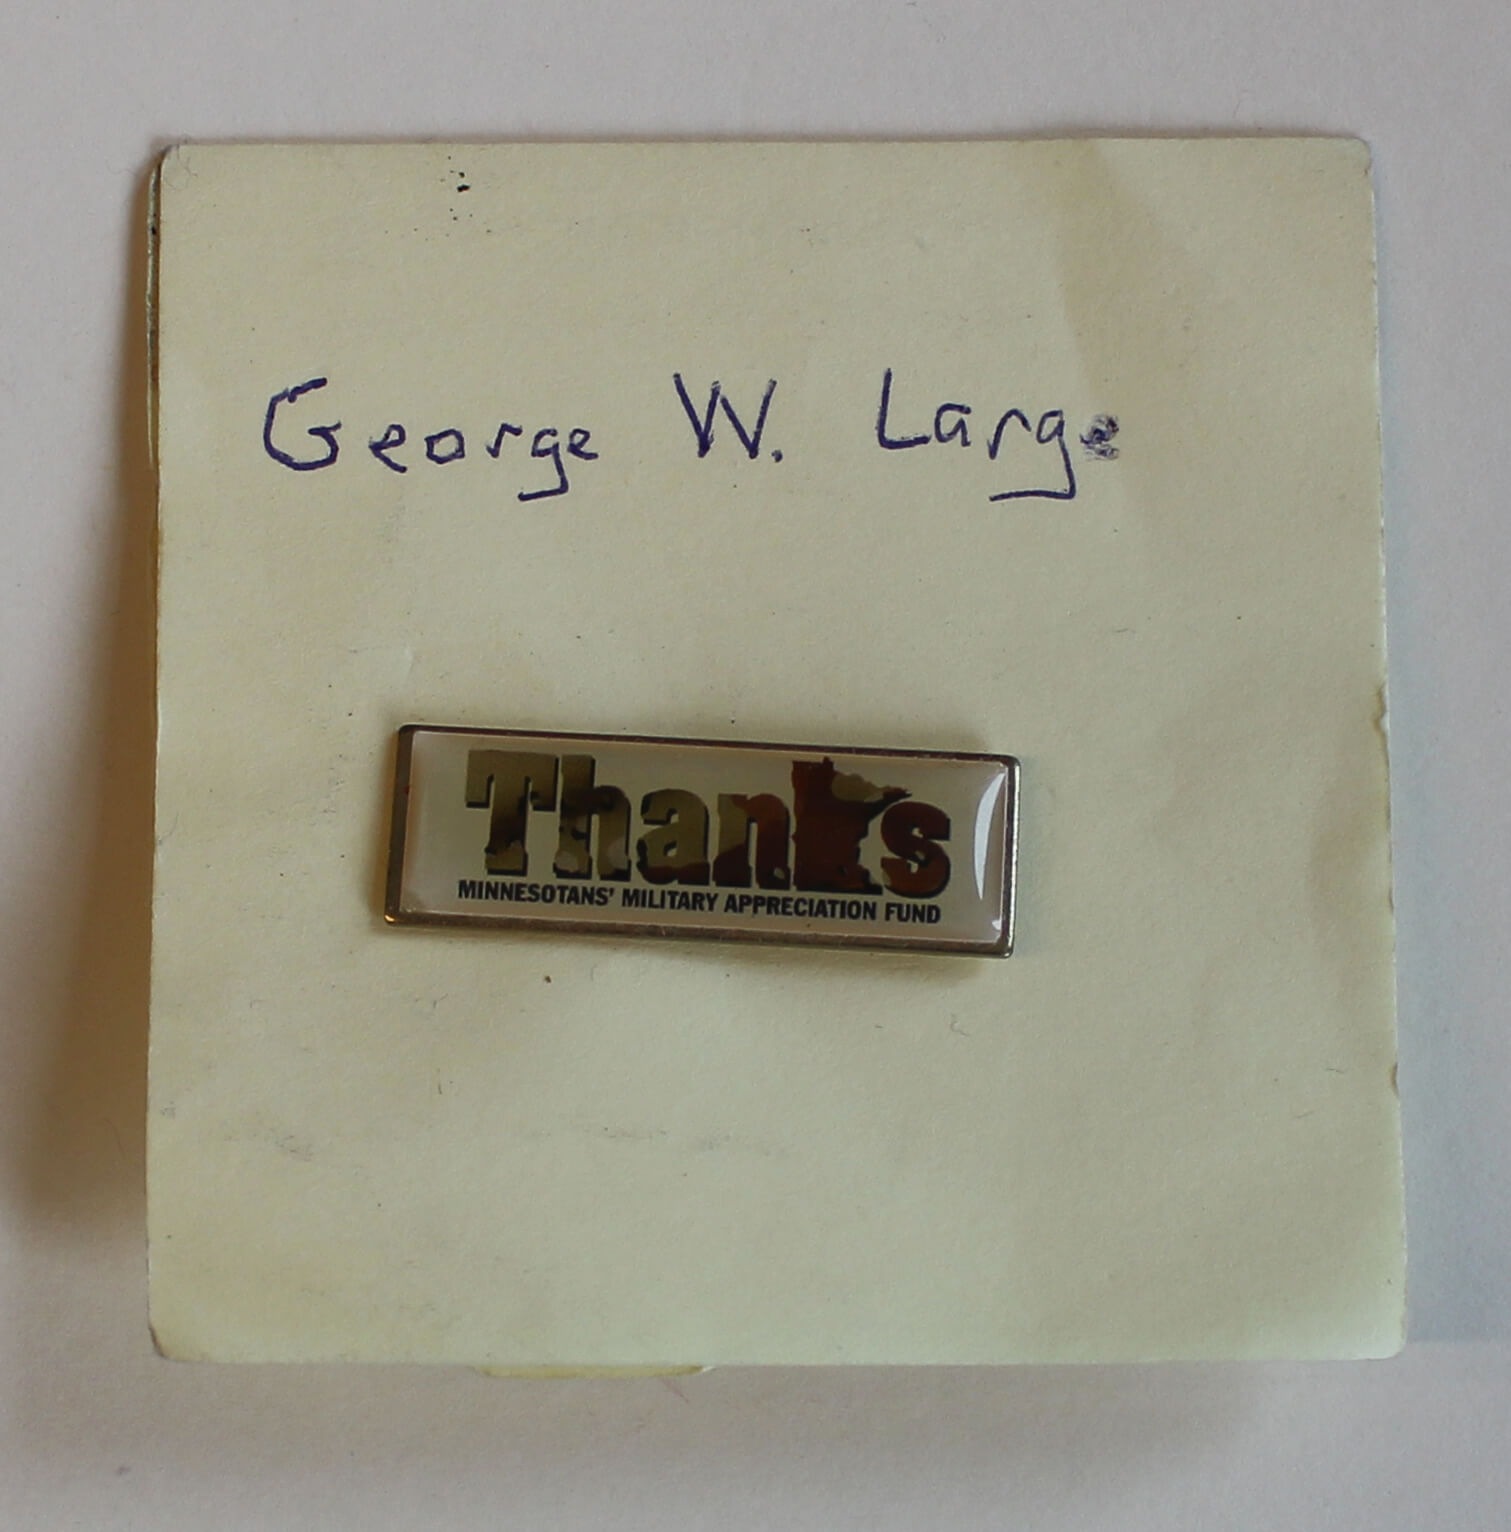 Yellow Post-It note with the name George W. Large written on it with a Thanks- Minnesotan's Military Appreciation Fund pin.